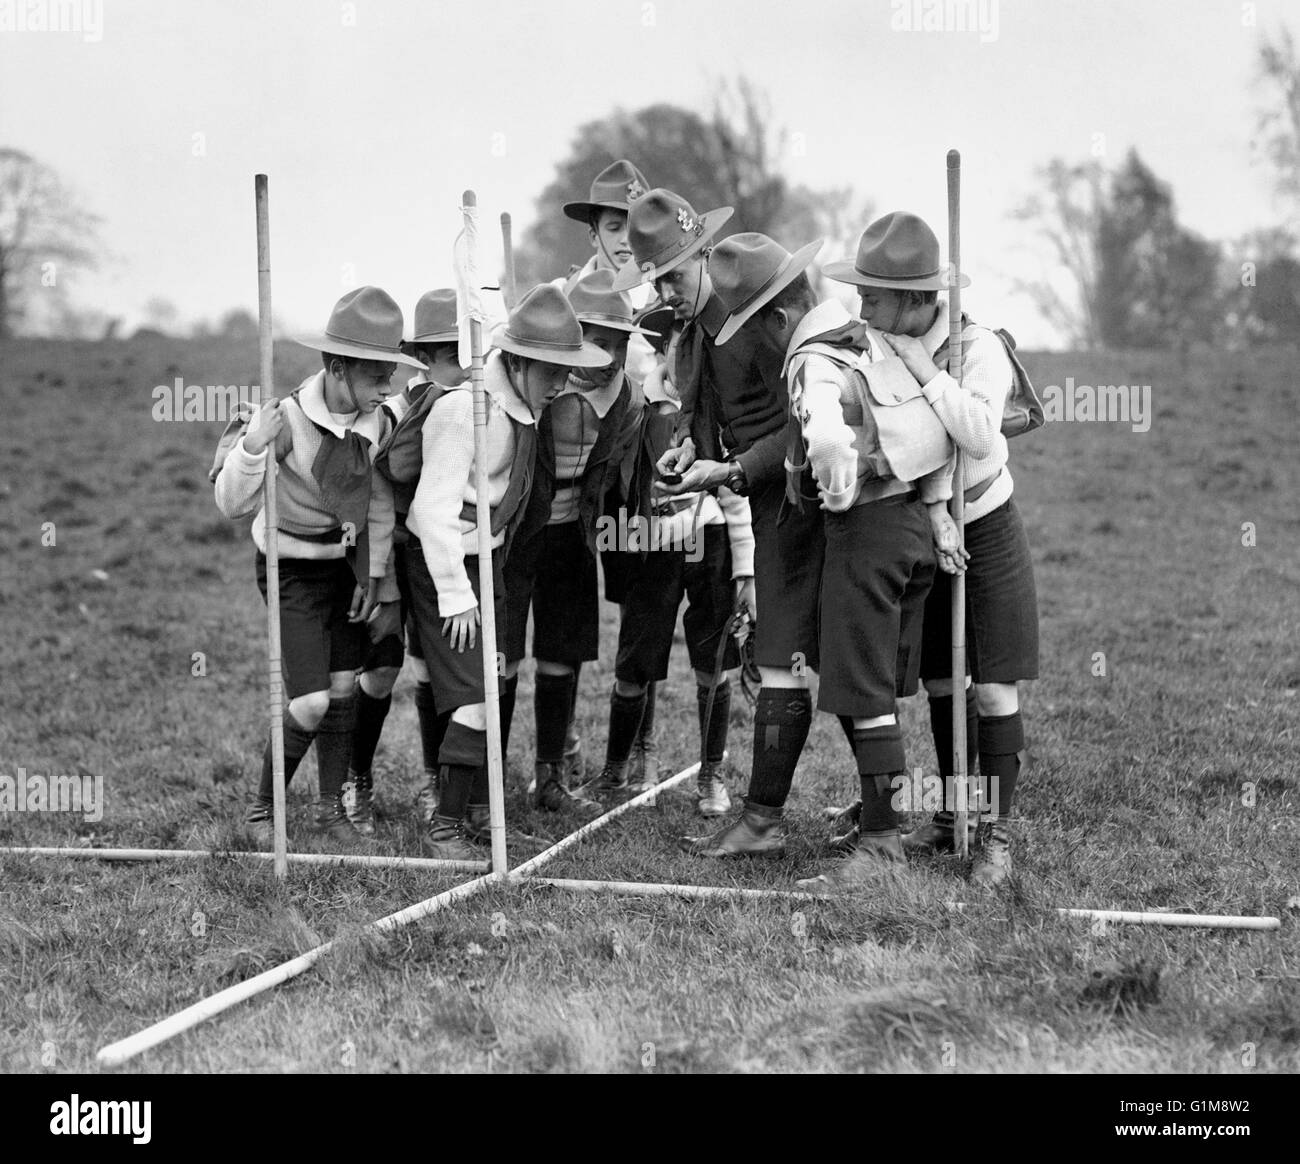 1910: A group of Boy Scouts listen intently to their Scout leader as he instructs them in the art of taking a compass bearing.  ... Boy Scouts - Orienteering -  1910 ... 01-01-1910 ... - ... UK ... Photo credit should read: PA/Unique Reference No. 1398003 ... Stock Photo